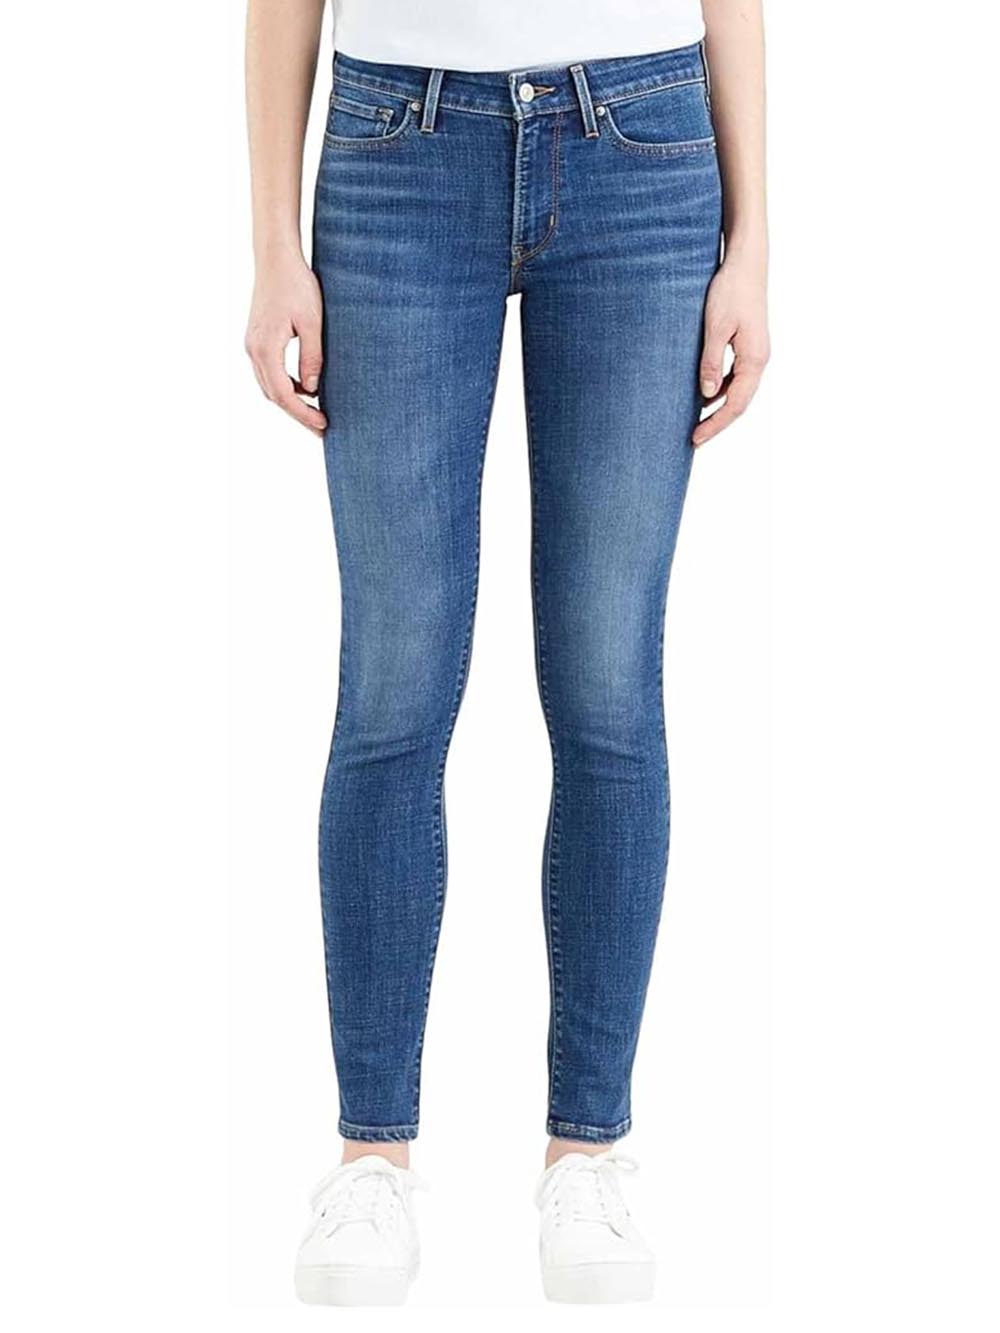 Levi's Jeans Donna 711 Skinny 18881 Scuro